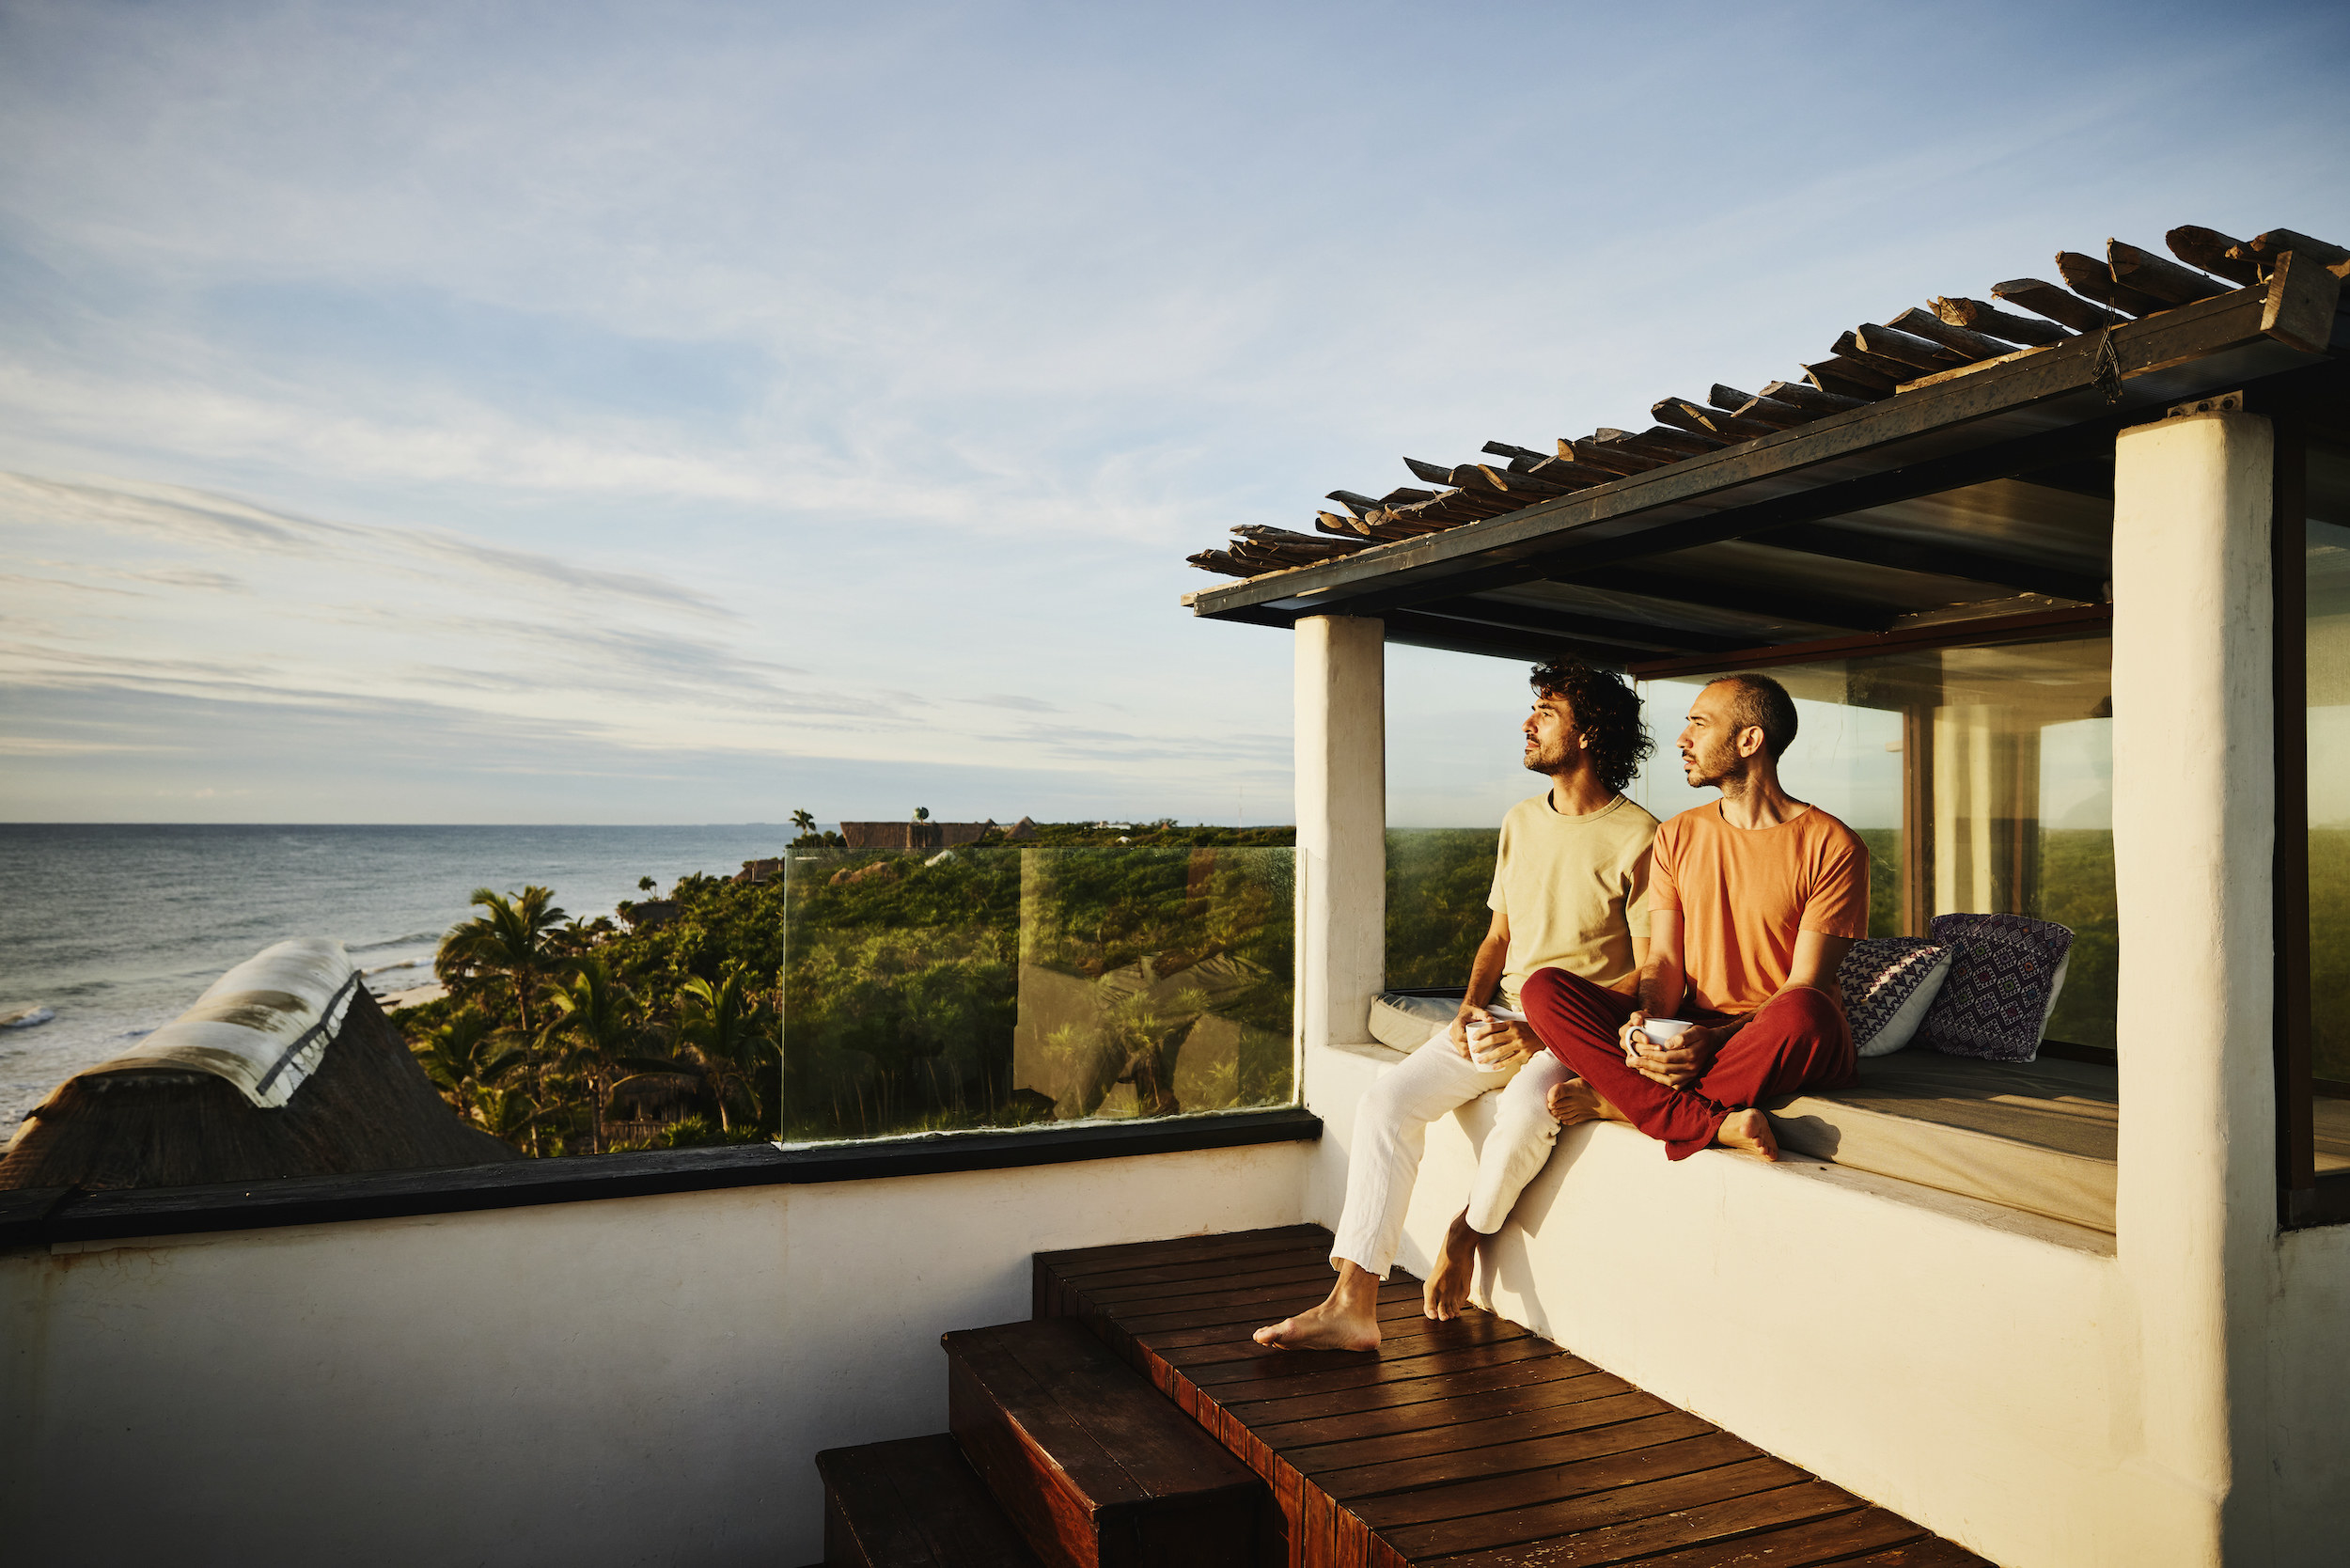 Two men sitting on a patio overlooking the ocean